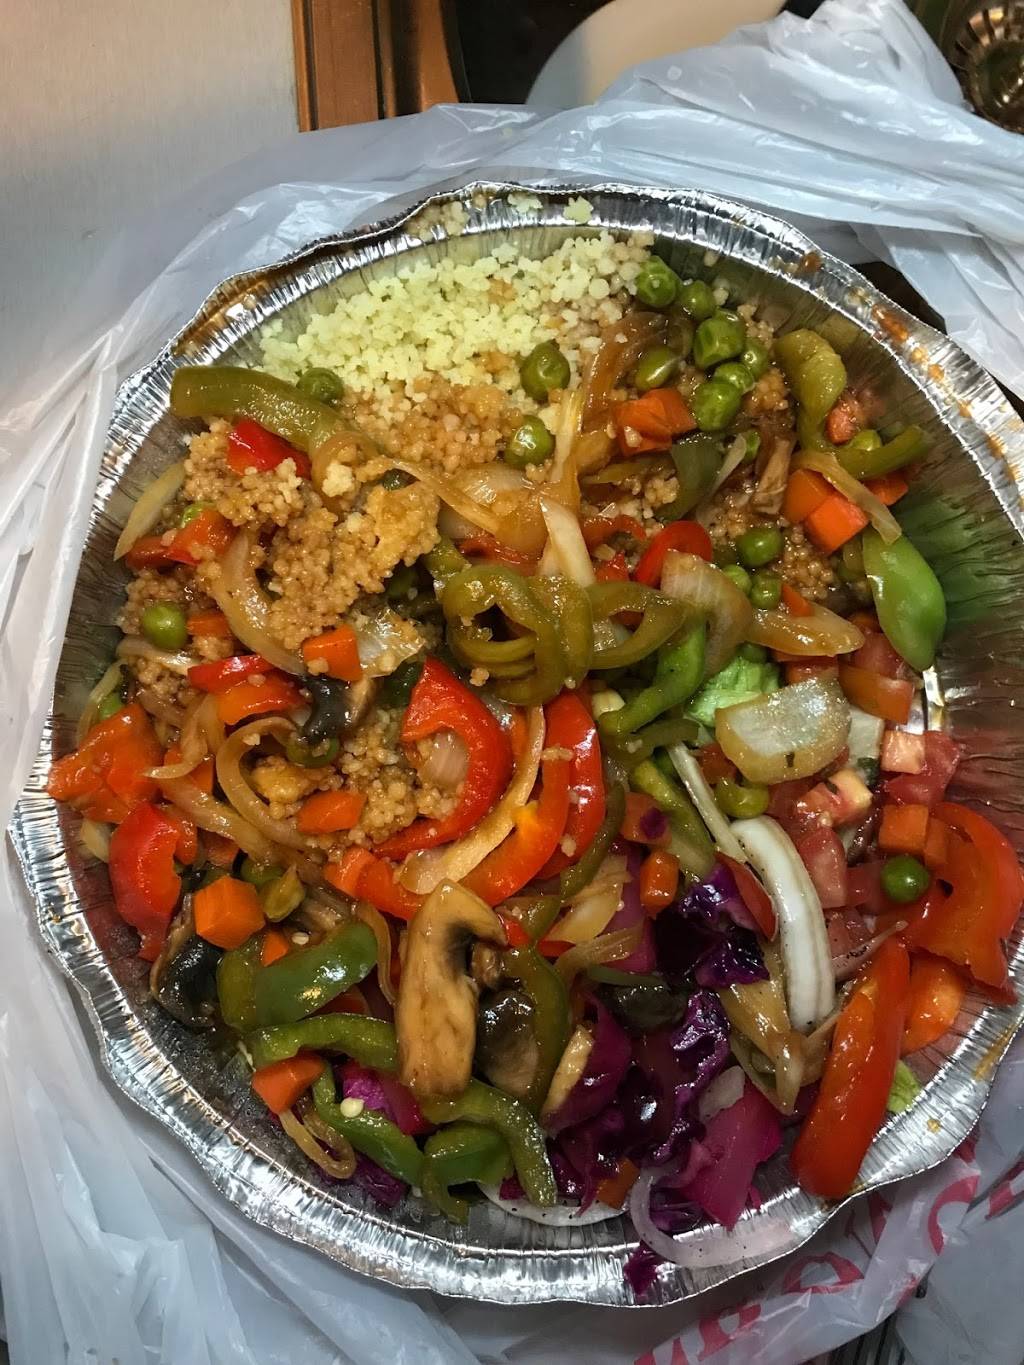 Damas Falafel House | meal delivery | 407 Myrtle Ave, Brooklyn, NY 11205, USA | 7188526677 OR +1 718-852-6677